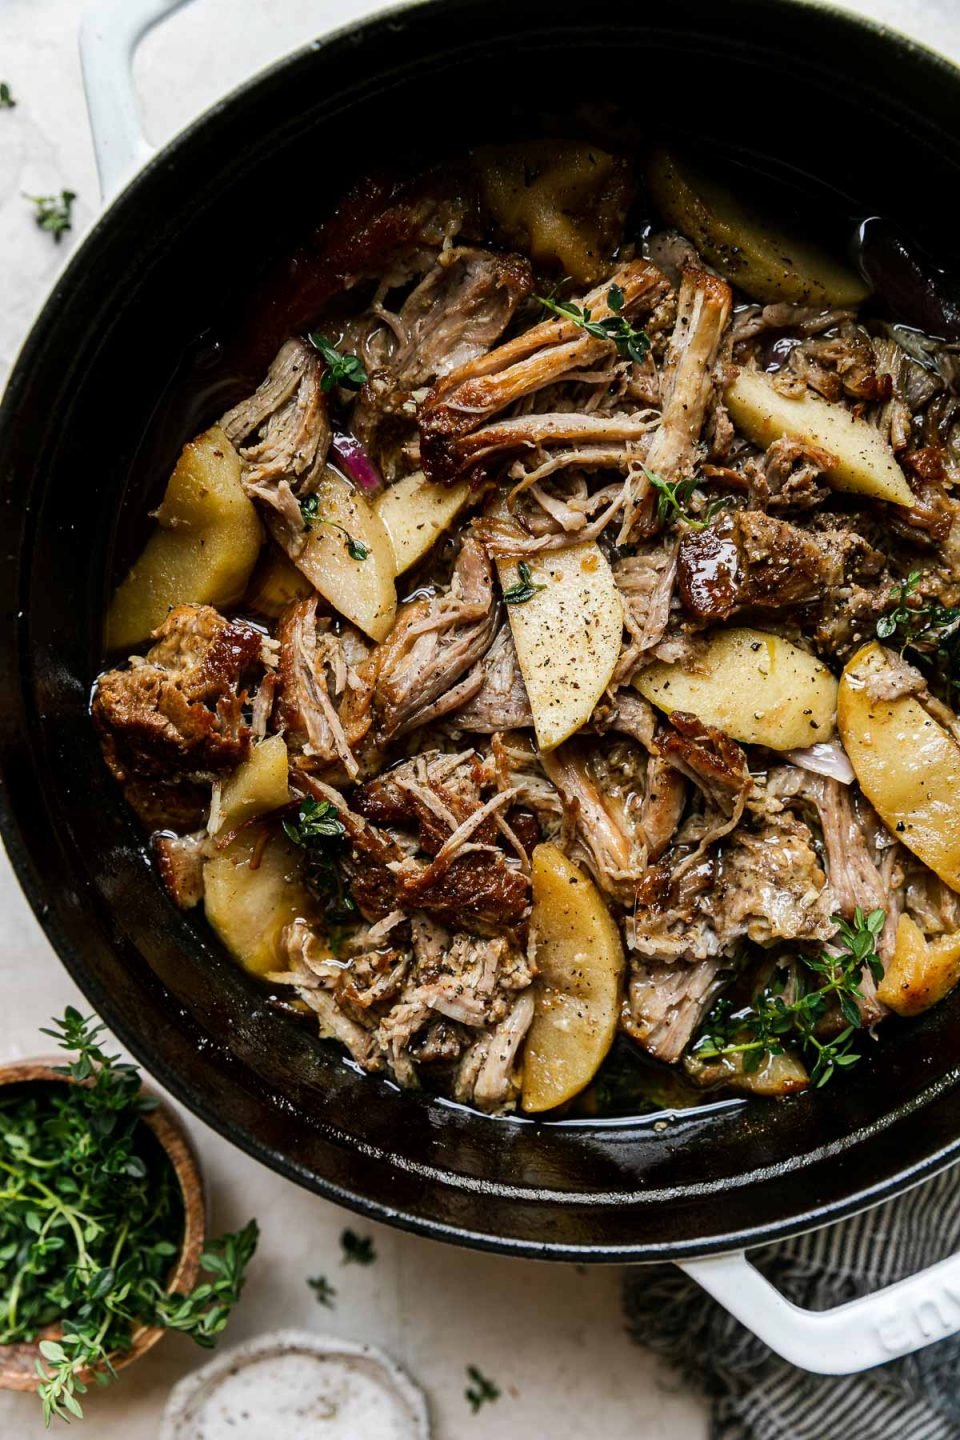 Apple Cider Braised Pork Shoulder in a white Dutch oven atop a creamy cement surface. Fresh thyme has been sprinkled on top. Two small pinch bowls filled with additional fresh herbs & kosher salt, & a white & blue striped linen napkin sit alongside the Dutch oven.